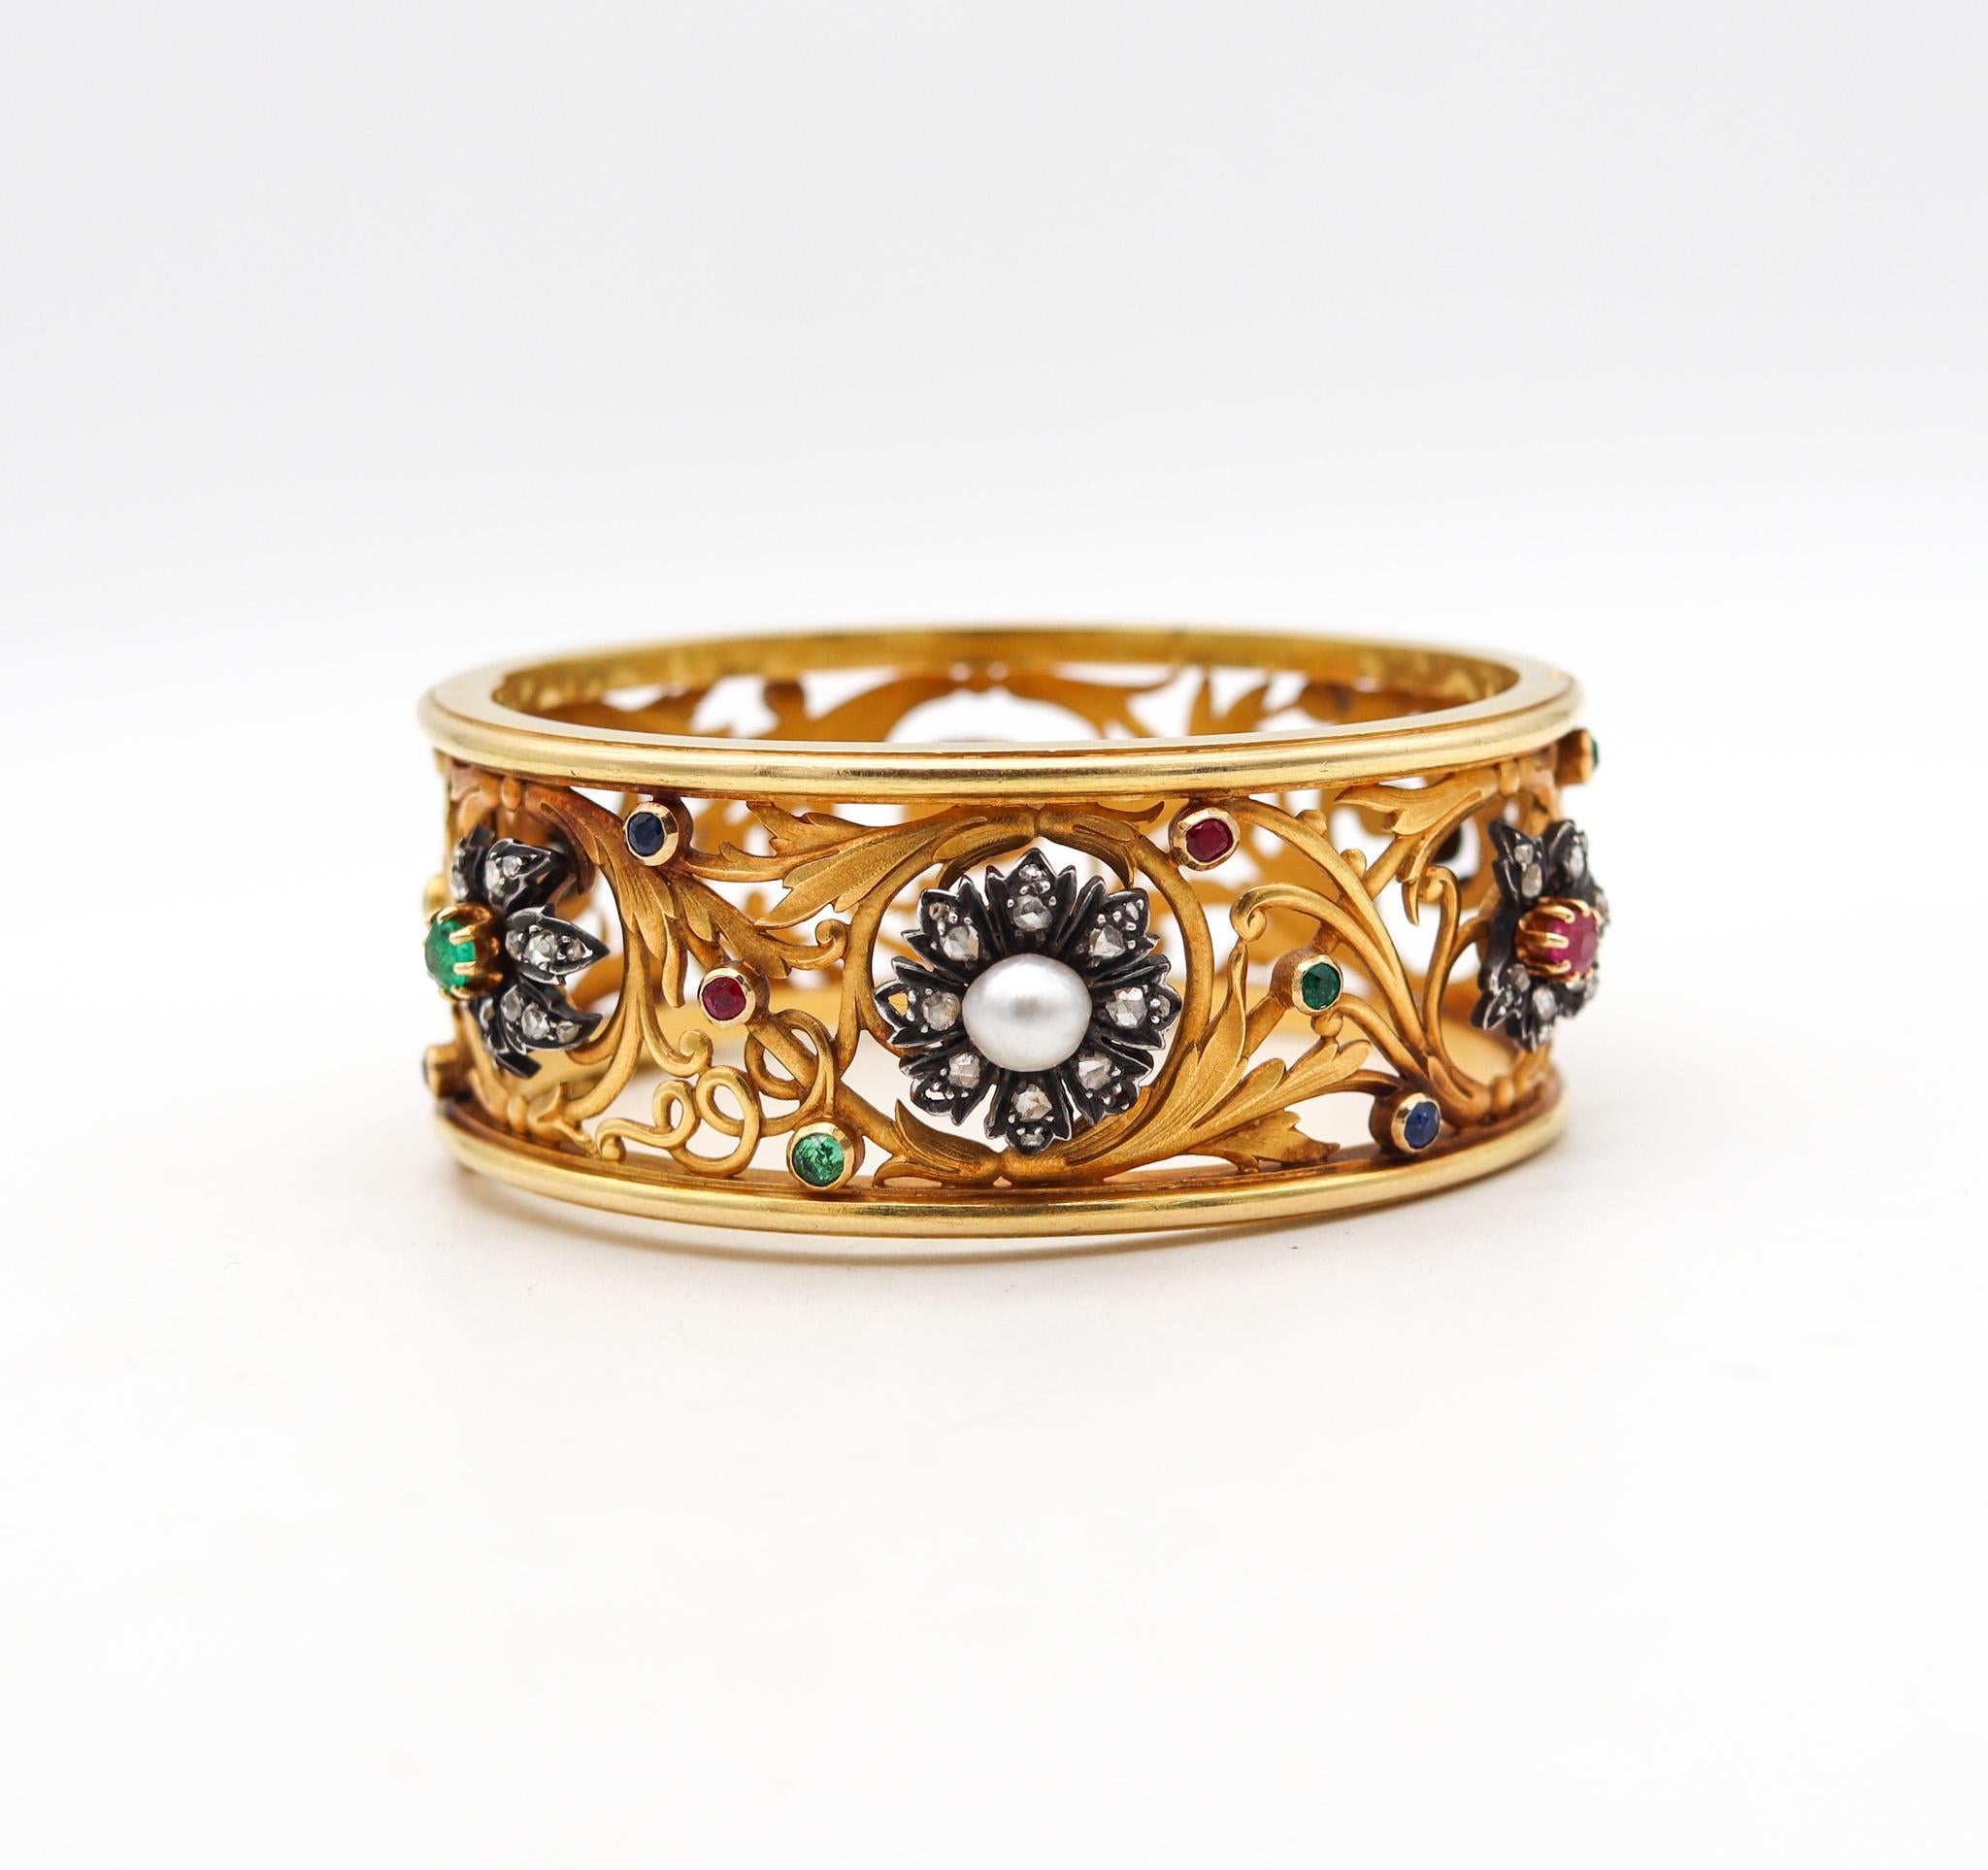 Mixed Cut French 1890 Art Nouveau Bangle Bracelet In 18Kt Yellow Gold With Gemstones For Sale